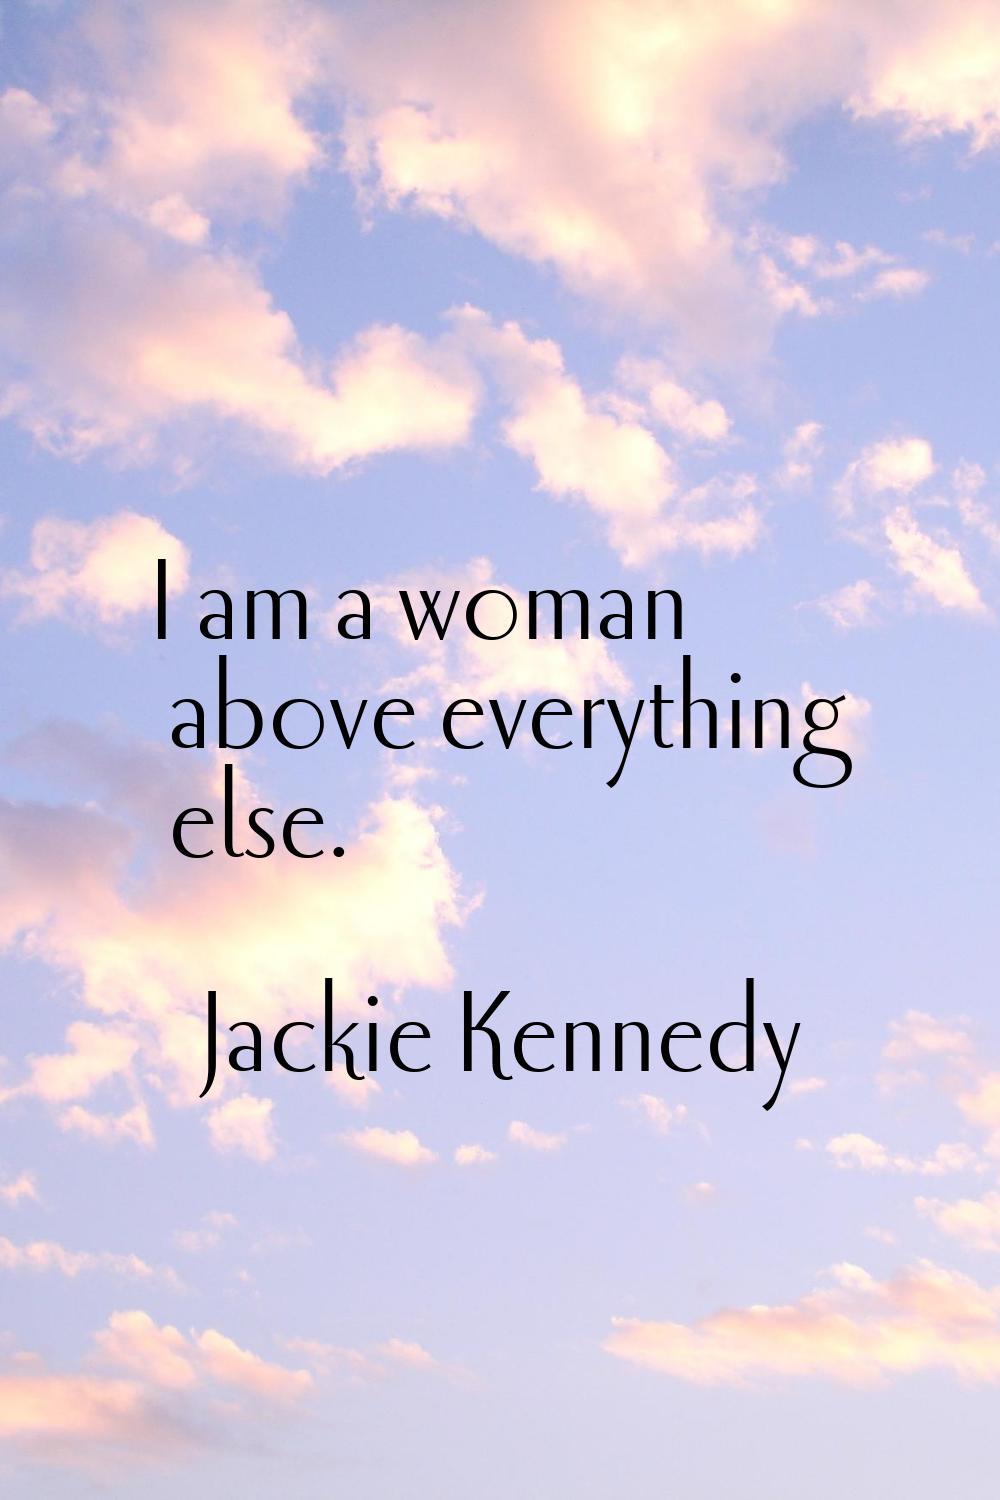 I am a woman above everything else.